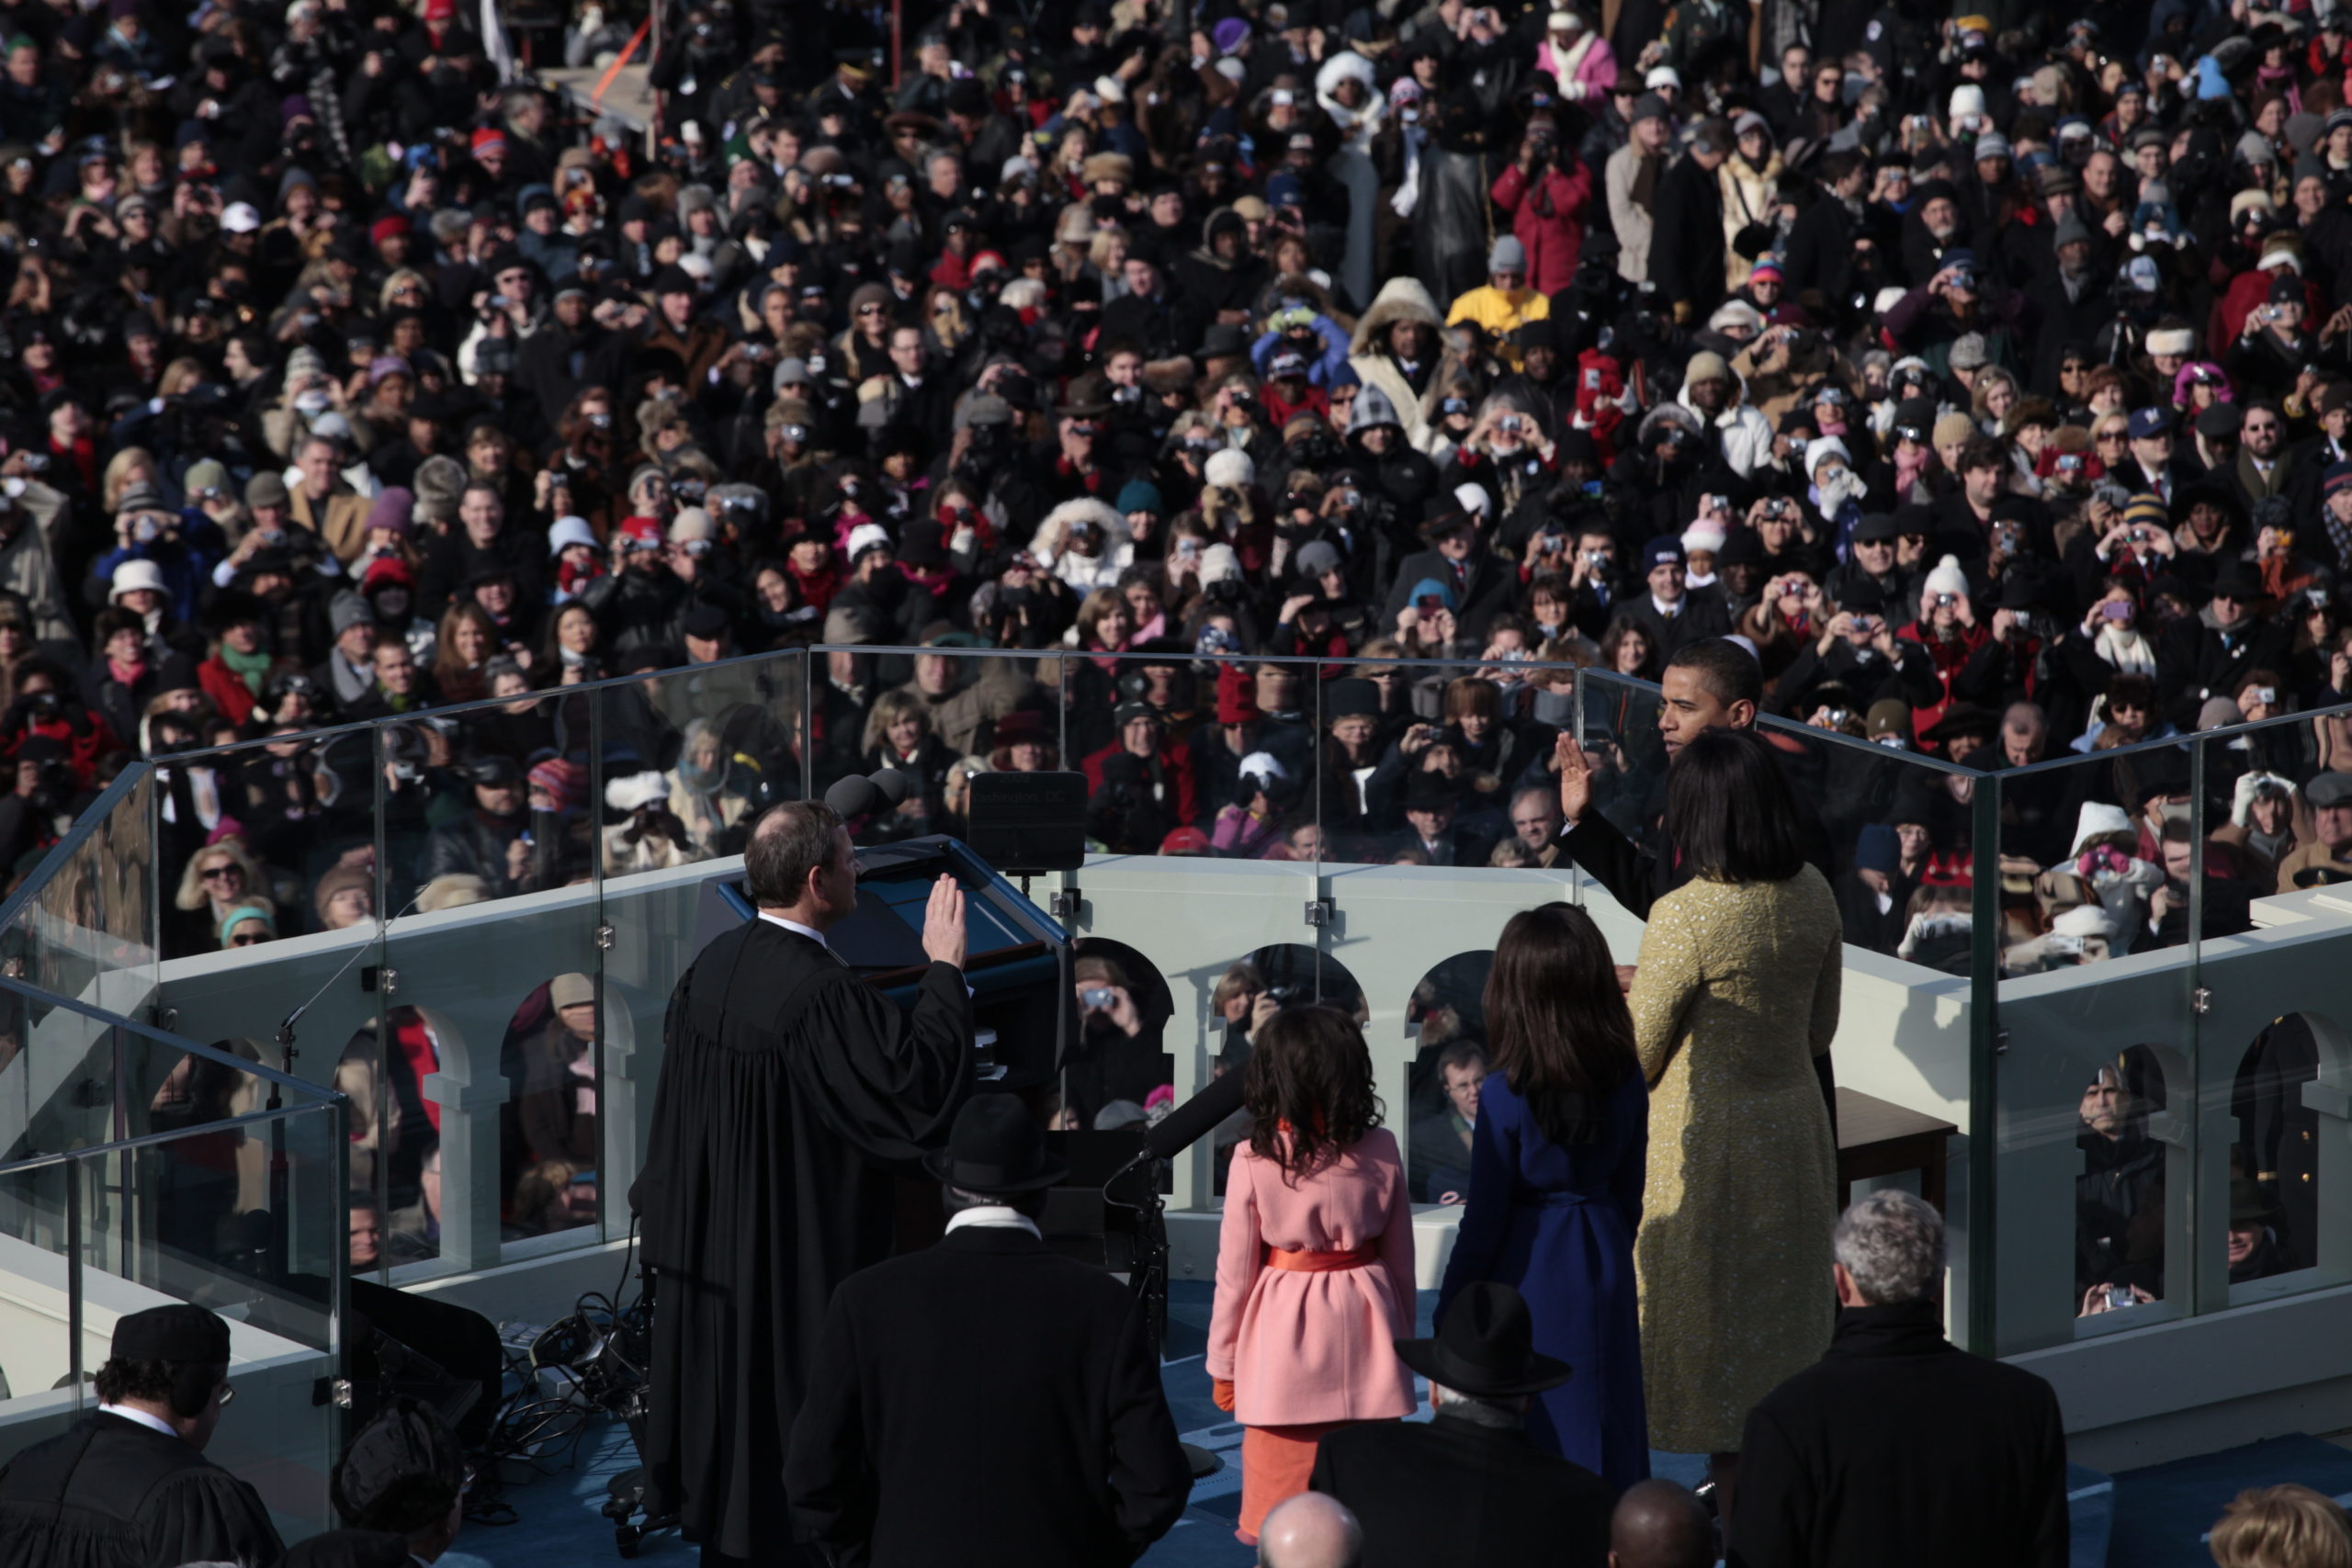 President Barack Obama is sworn in as the 44th President of the United States 